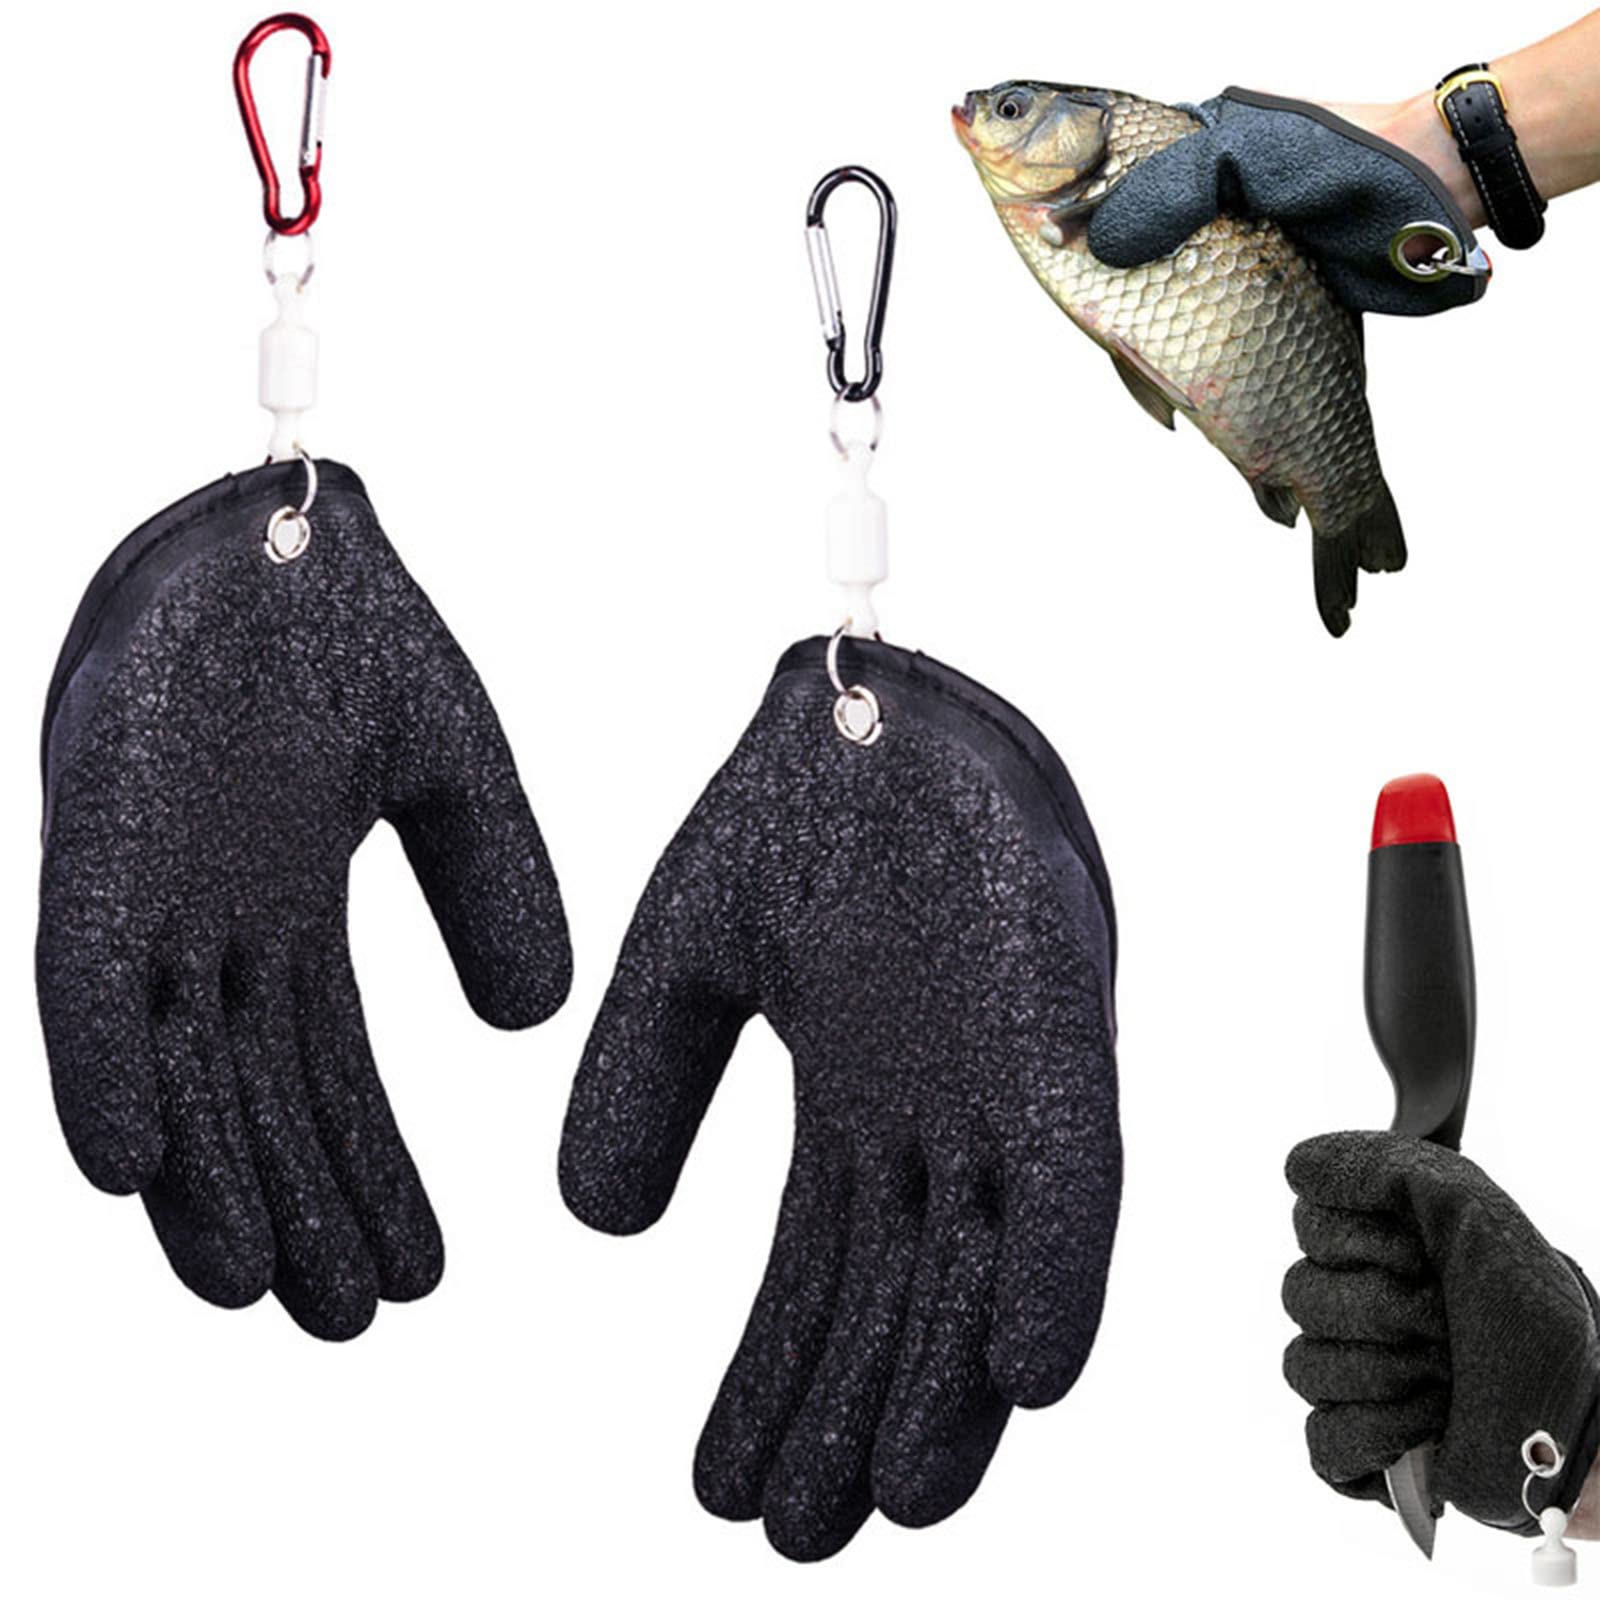 Unbranded Fishing Gloves for sale